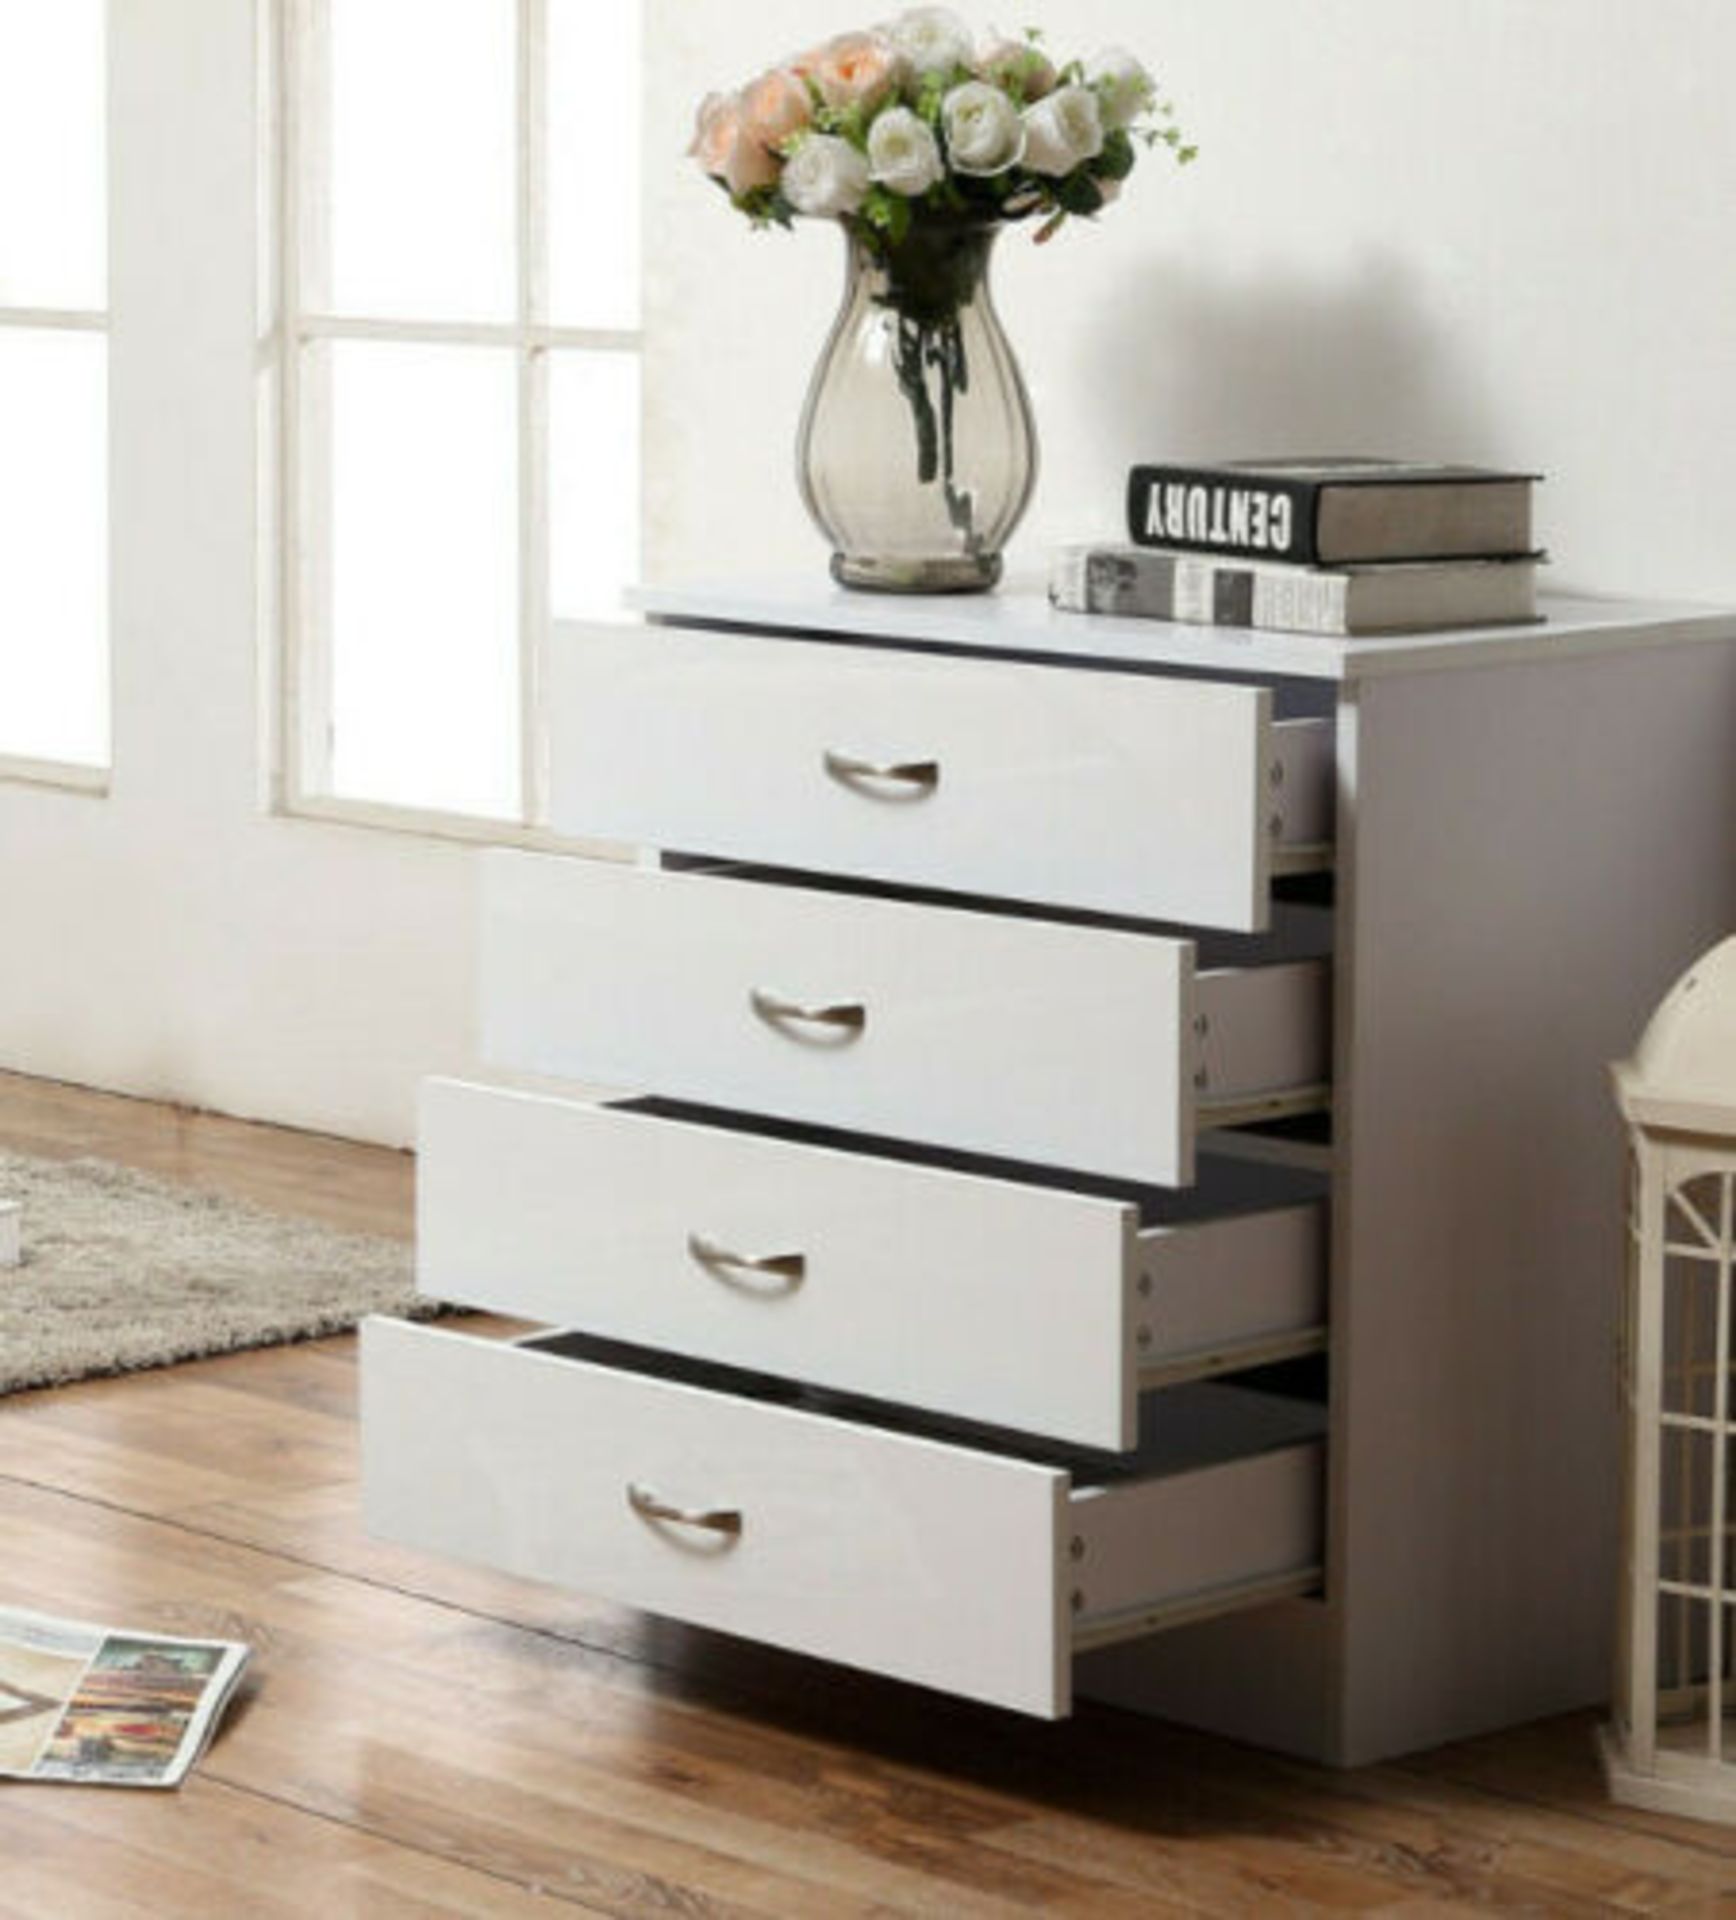 HIGH GLOSS WHITE 4 DRAWER CHEST - Image 2 of 4